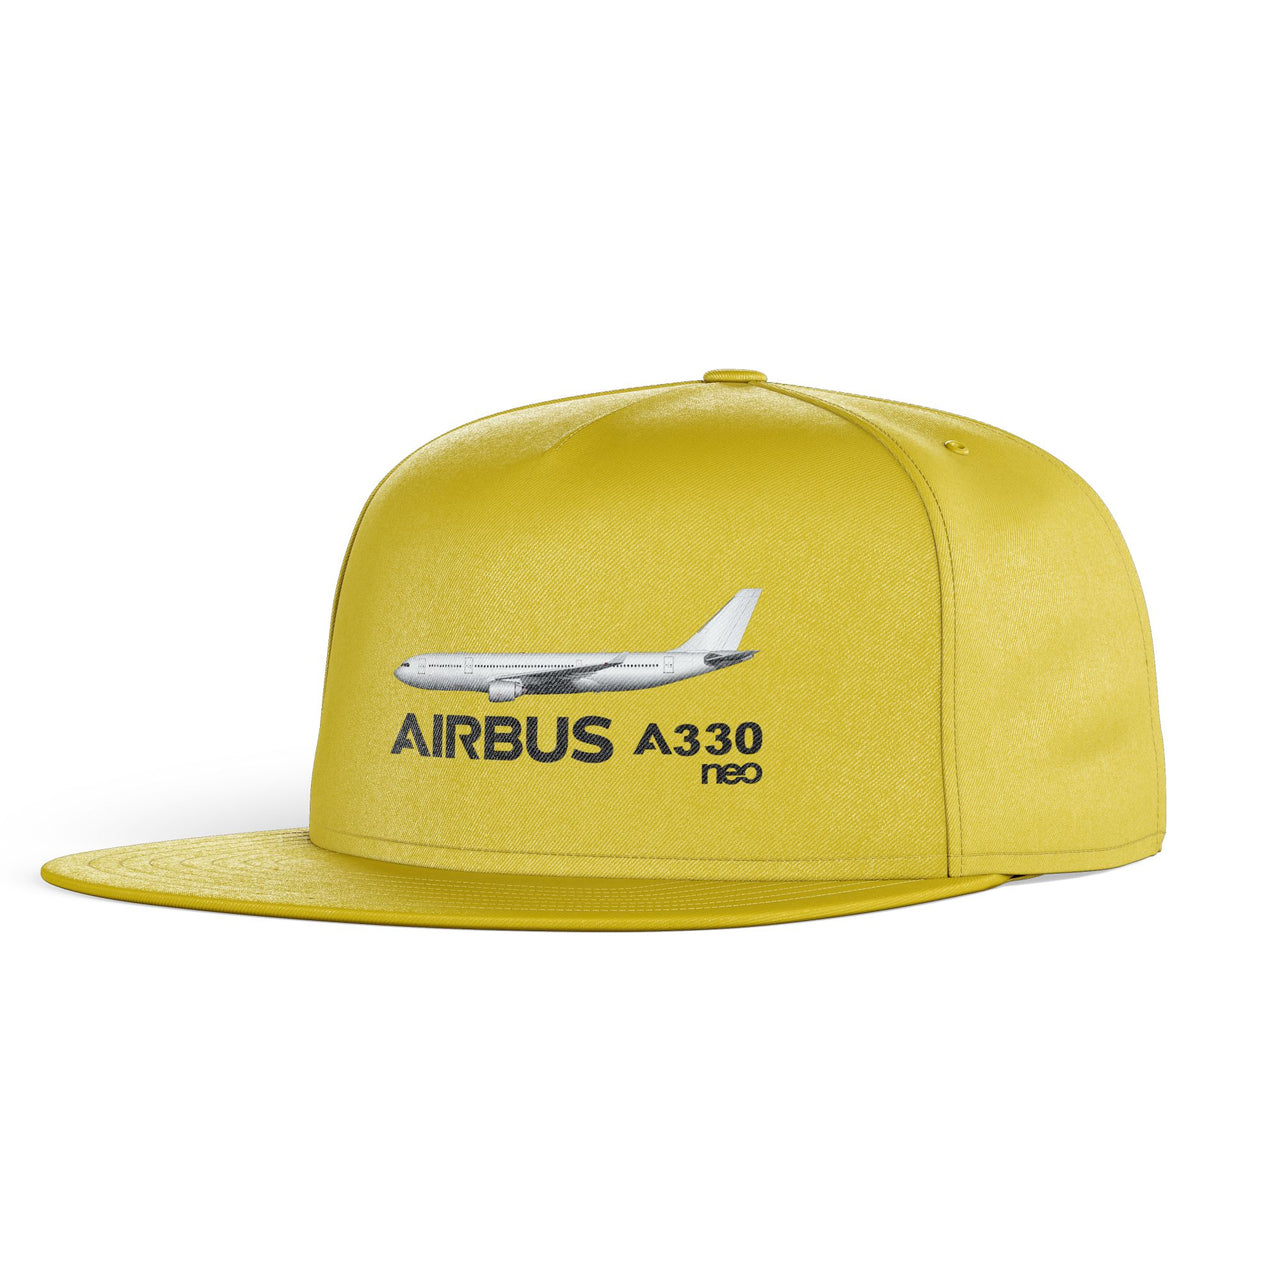 The Airbus A330neo Designed Snapback Caps & Hats